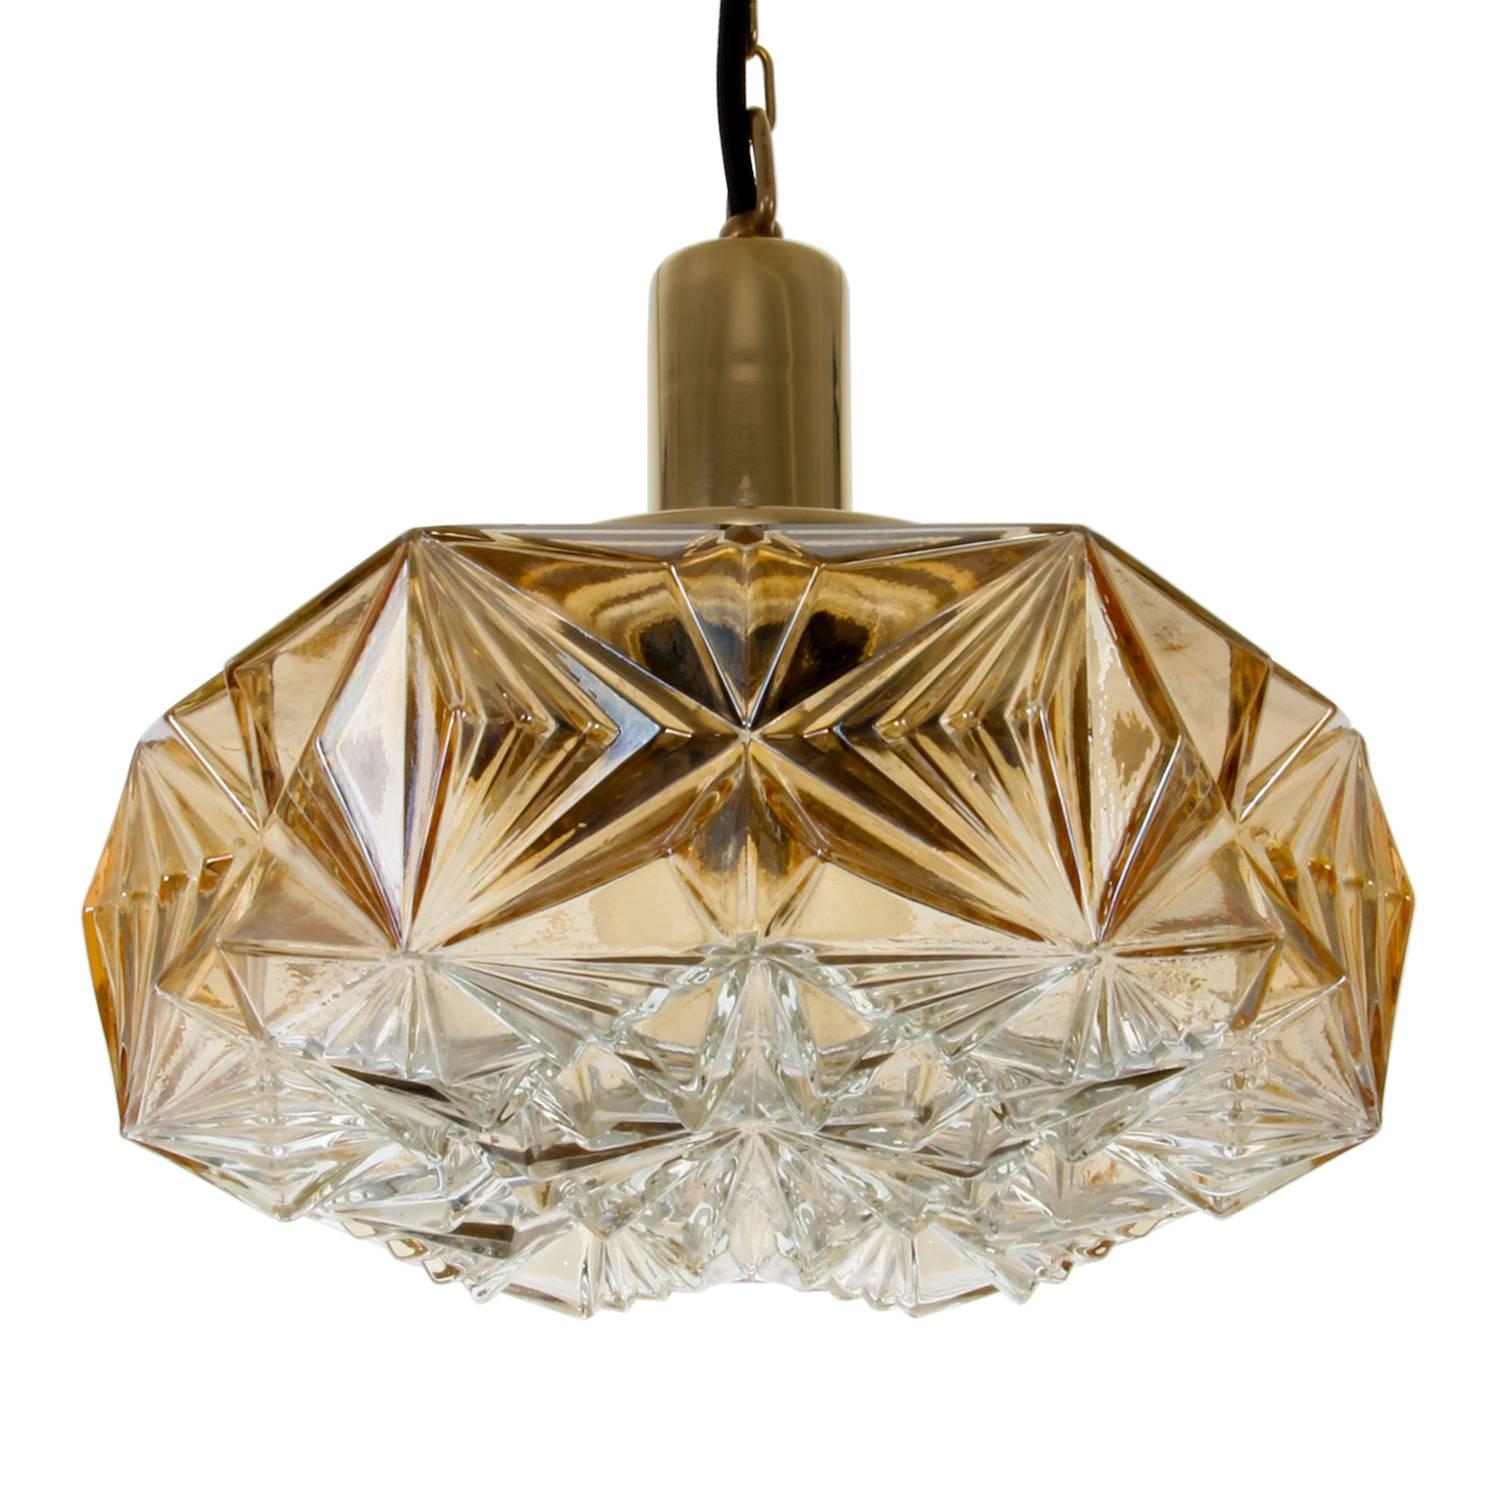 Mid-Century Modern Pressed Glass Pendant, No. 36404 by Vitrika, 1960s, Vintage Glass and Brass Lamp